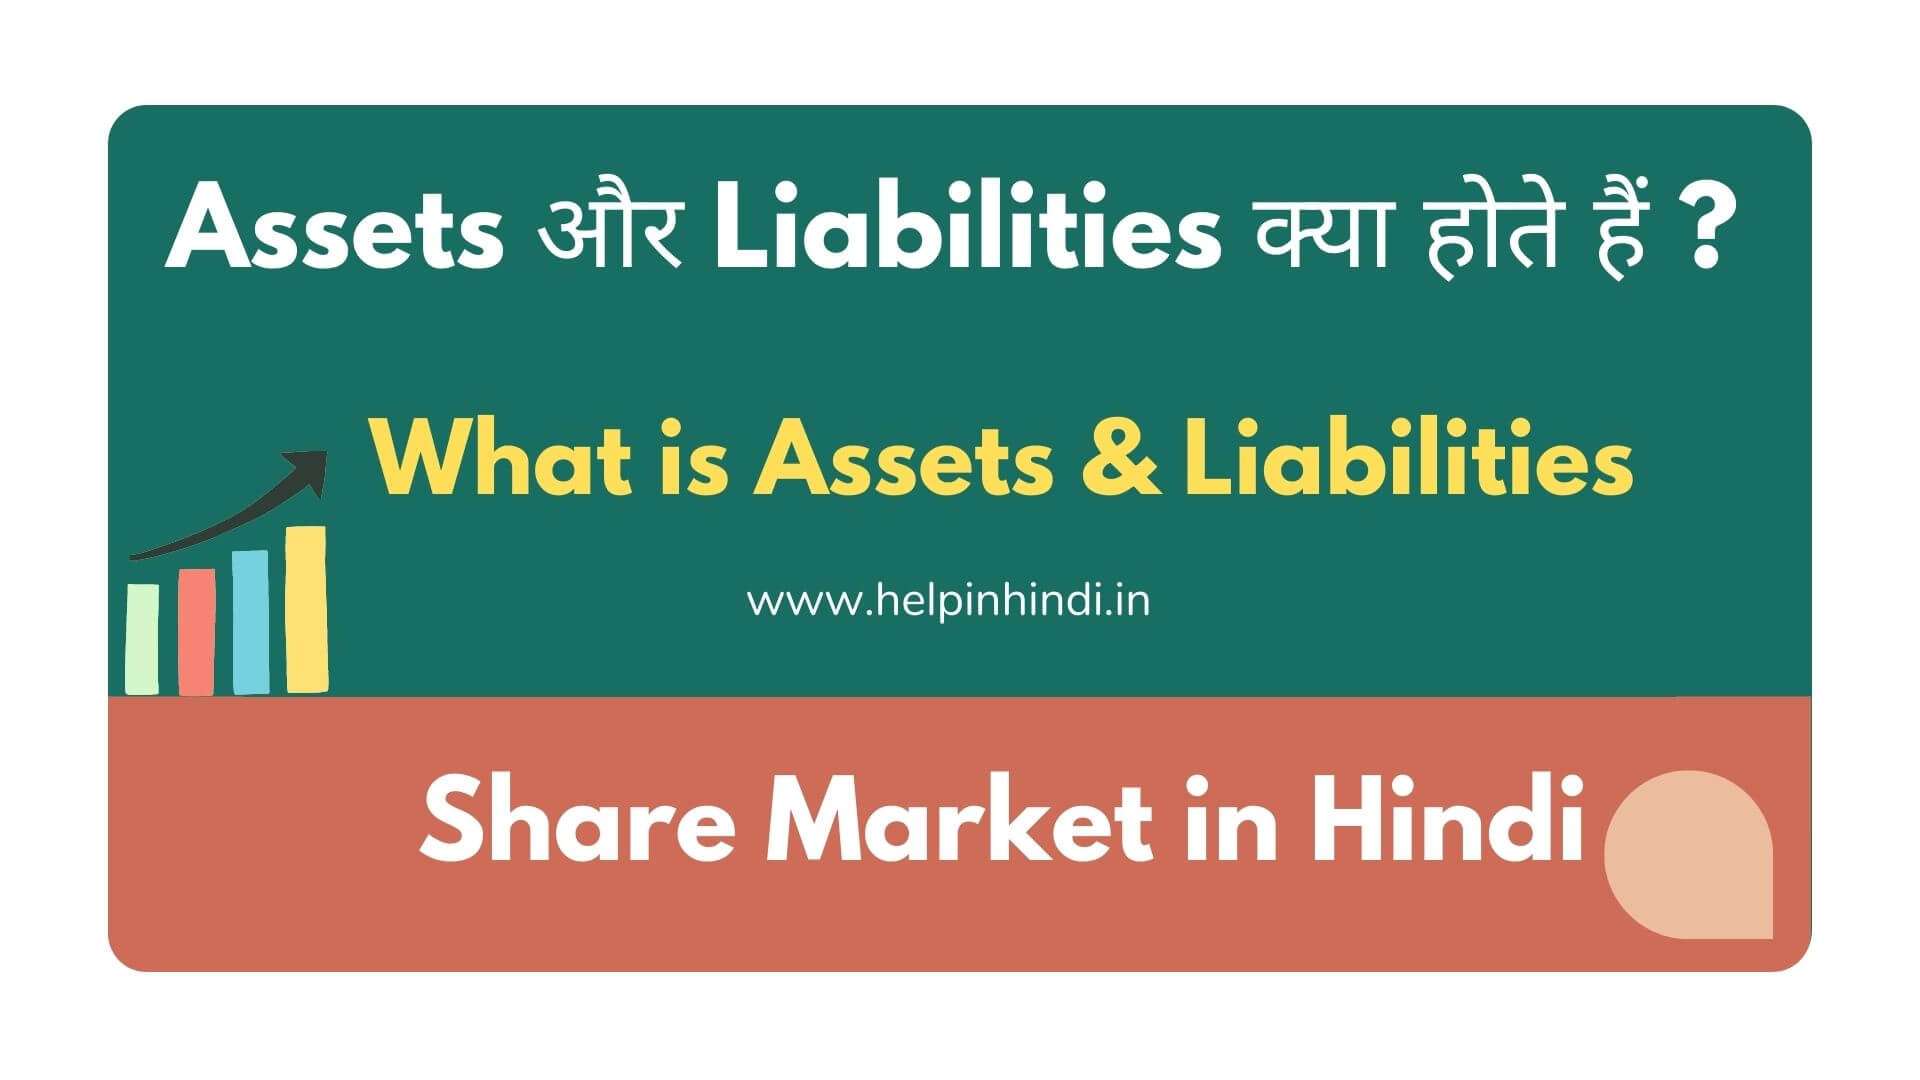 Assets and Liabilities in Hindi